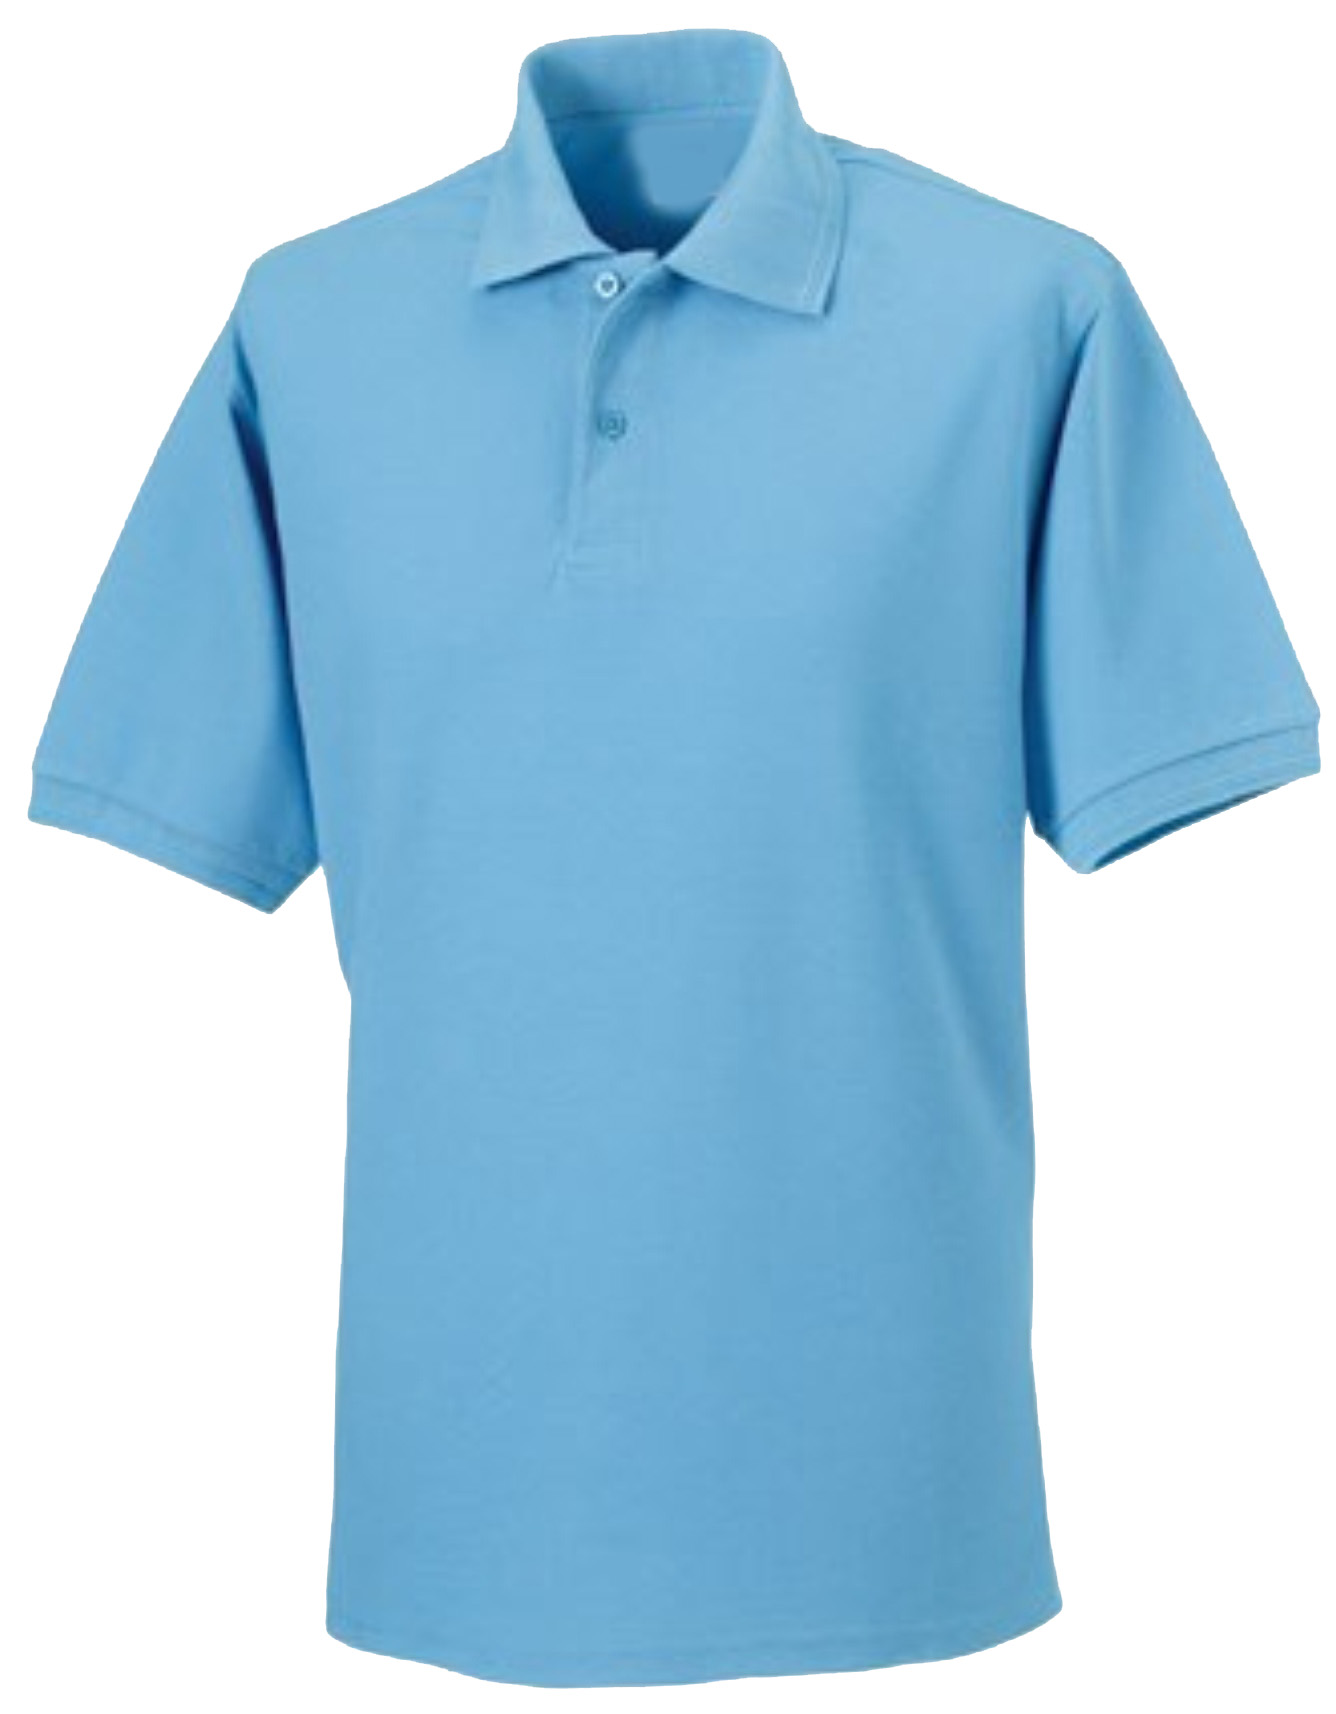 POLO SHIRT - Corporate Clothing | High Quality Embroidered Workwear UK ...